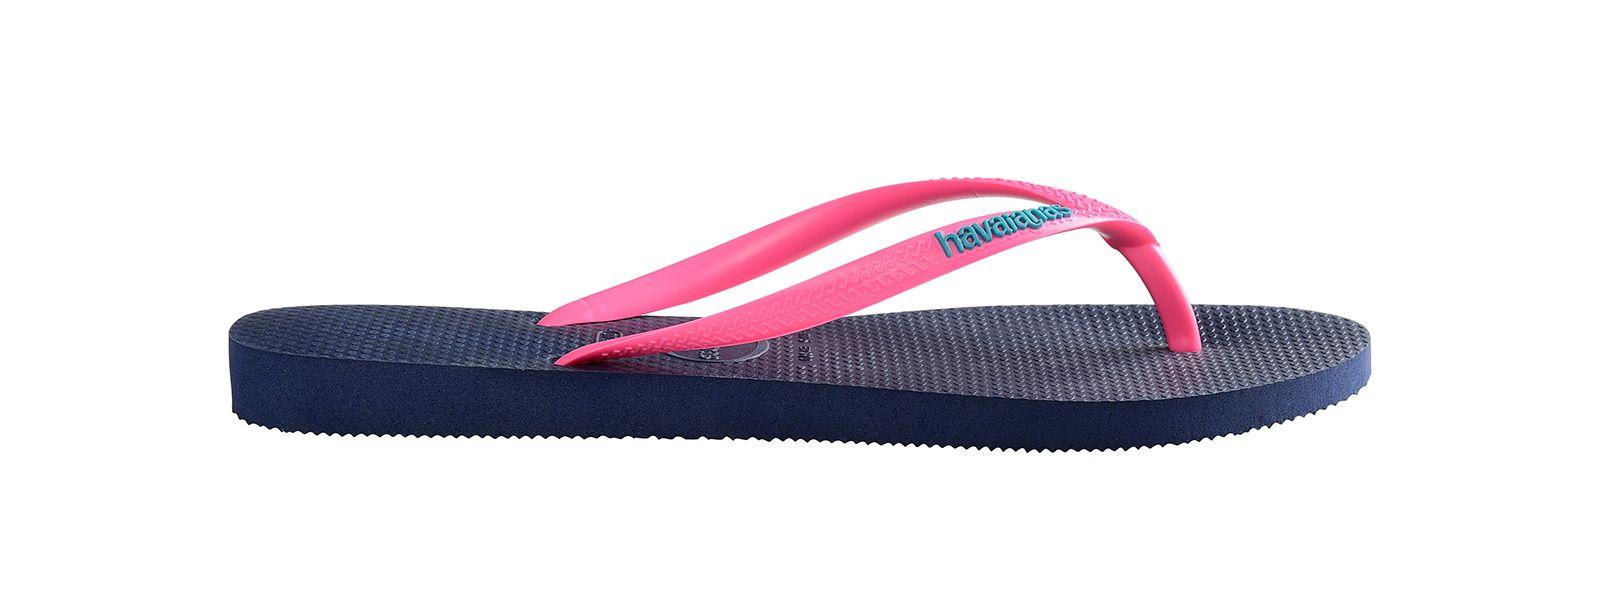 Blue and Pink Logo - Navy Blue Flip Flops And Pink Straps With The Havaianas Logo